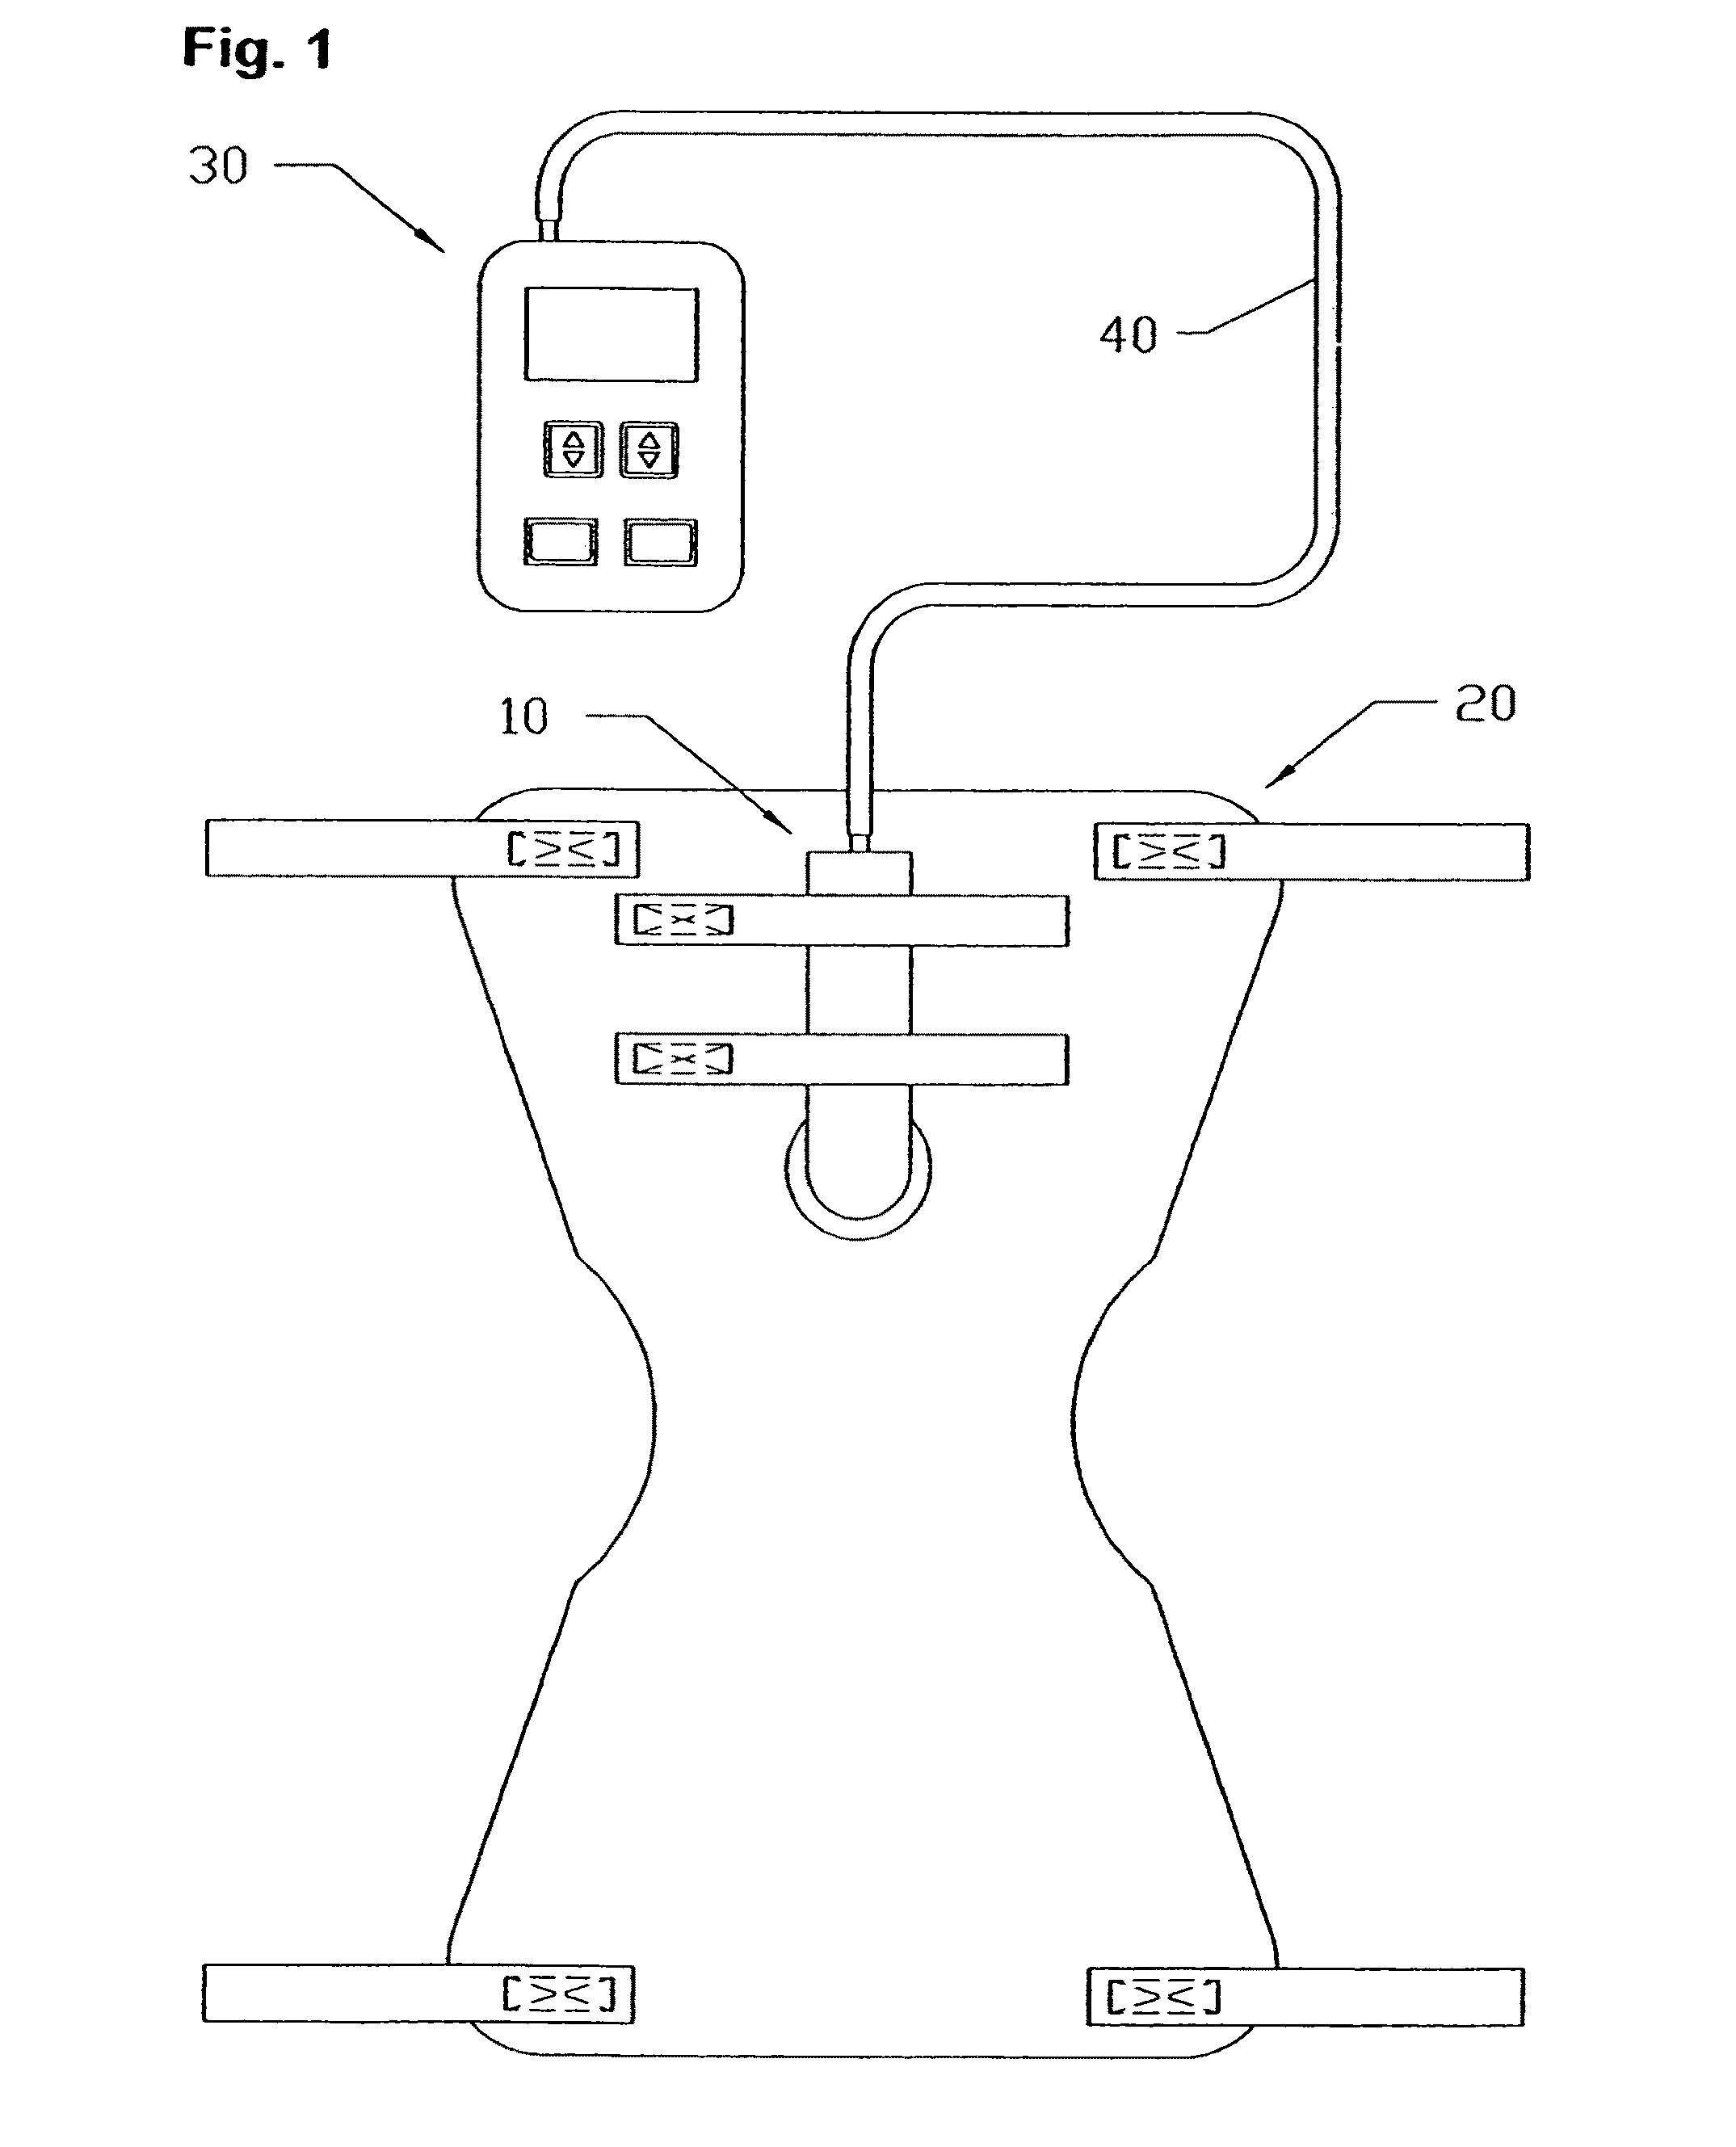 System and method for treating and/or preventing erection problems